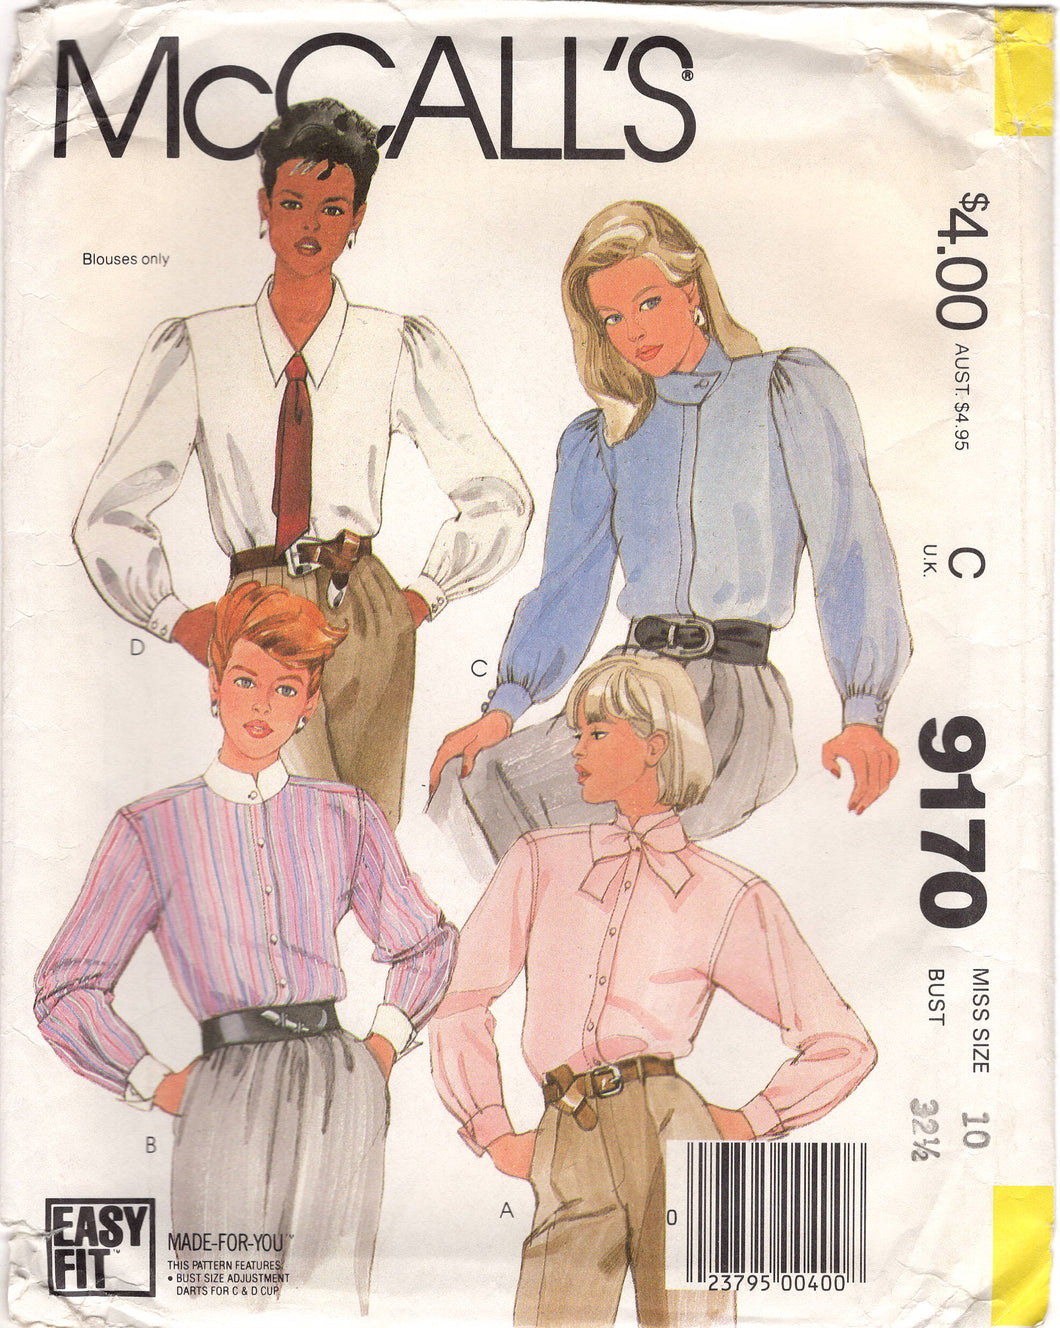 1980's McCall's Button Up Shirt pattern with Gathered Sleeve - Bust 32.5